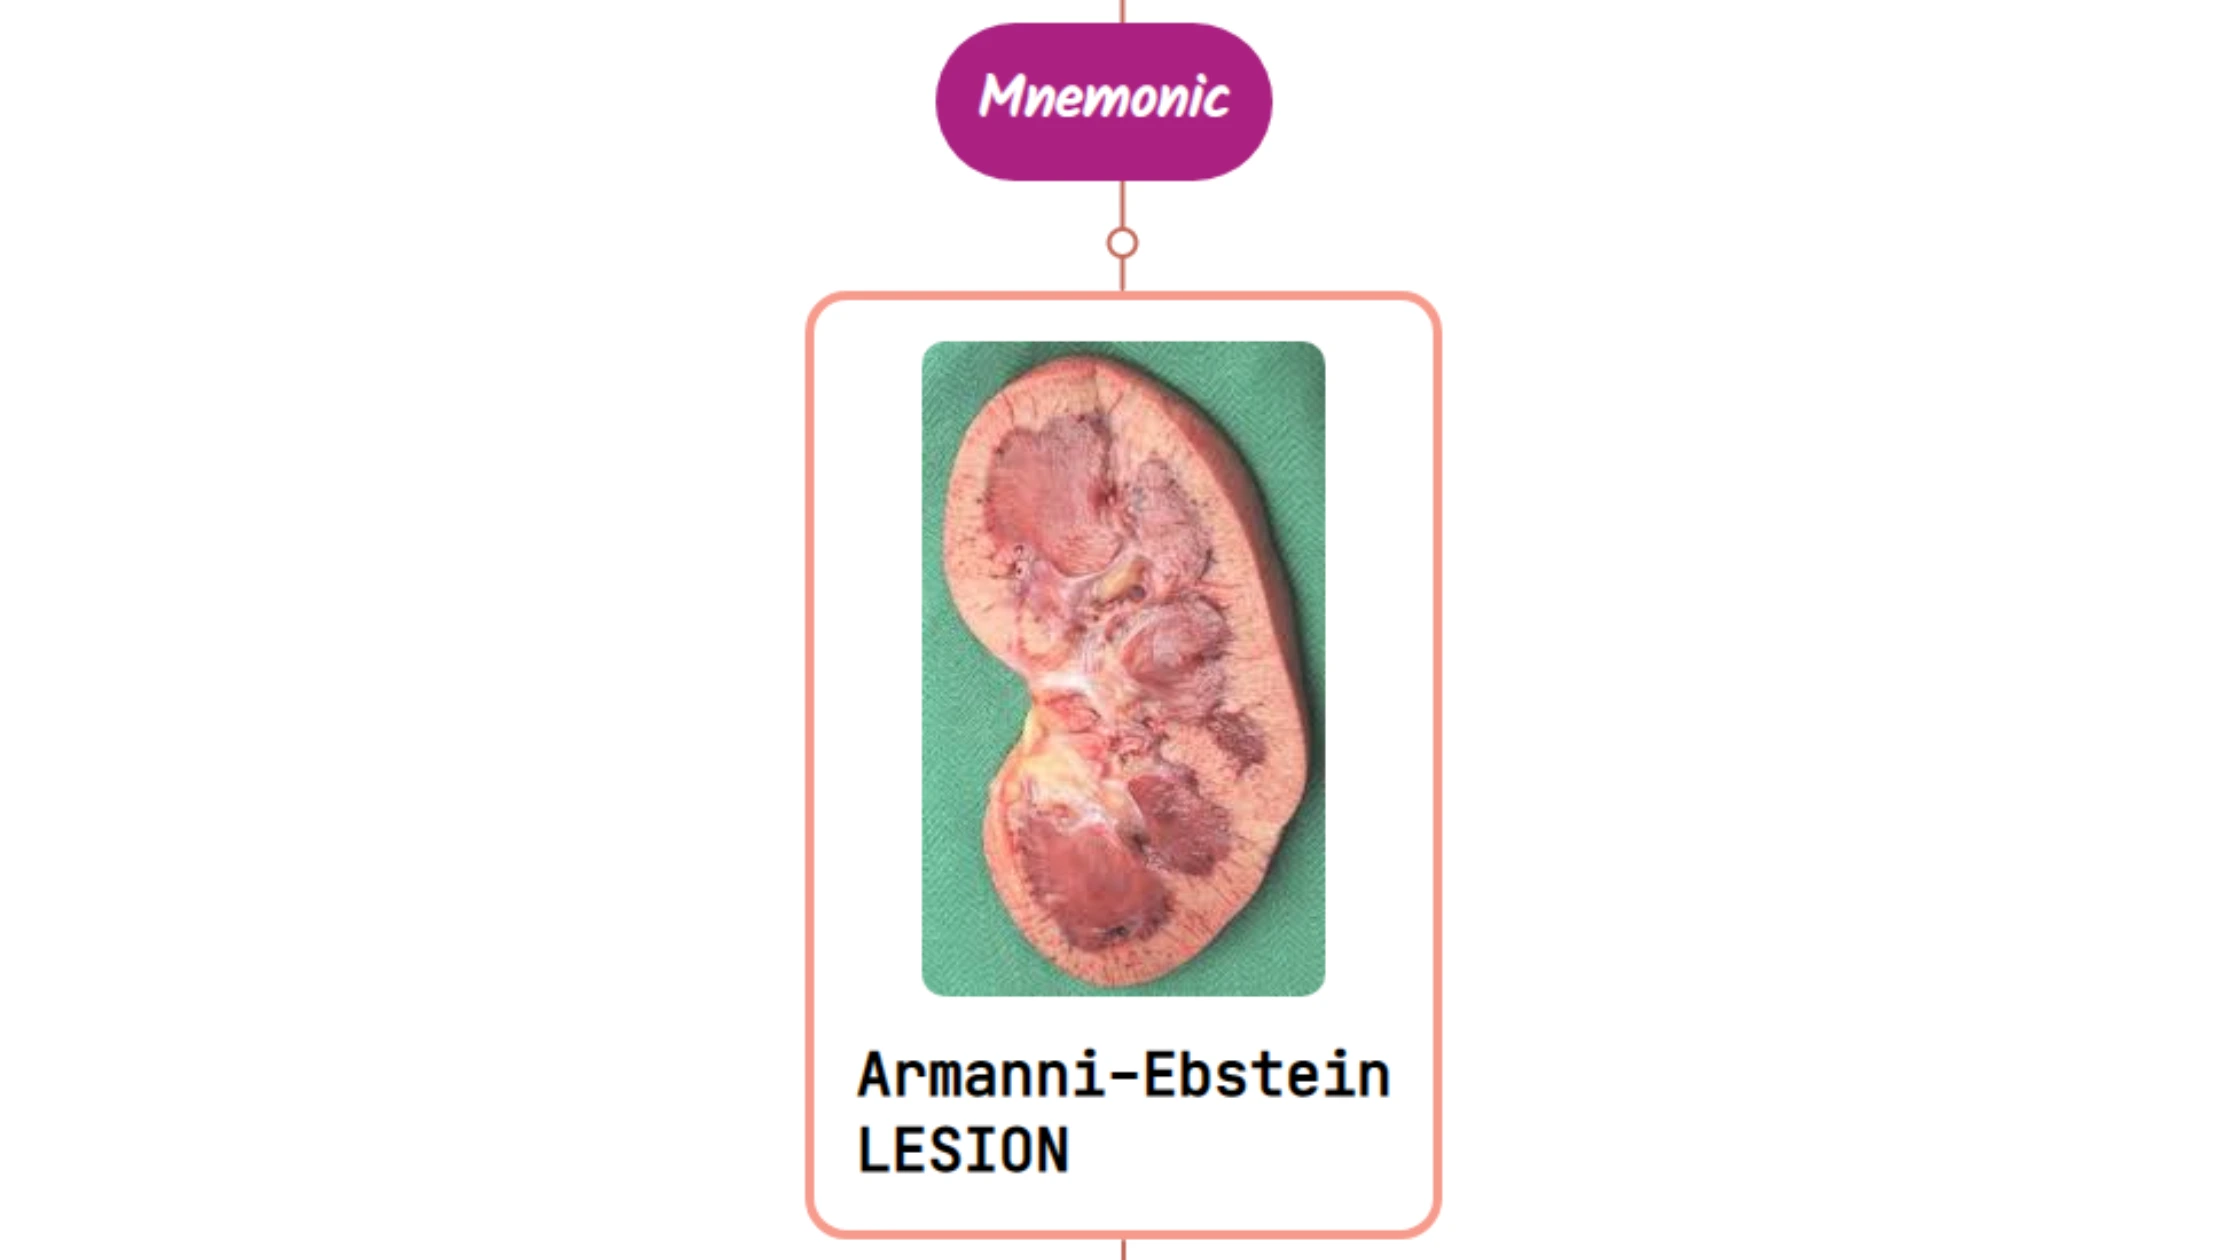 You are currently viewing Armanni-Ebstein Lesion : Mnemonics [NEVER FORGET AGAIN]